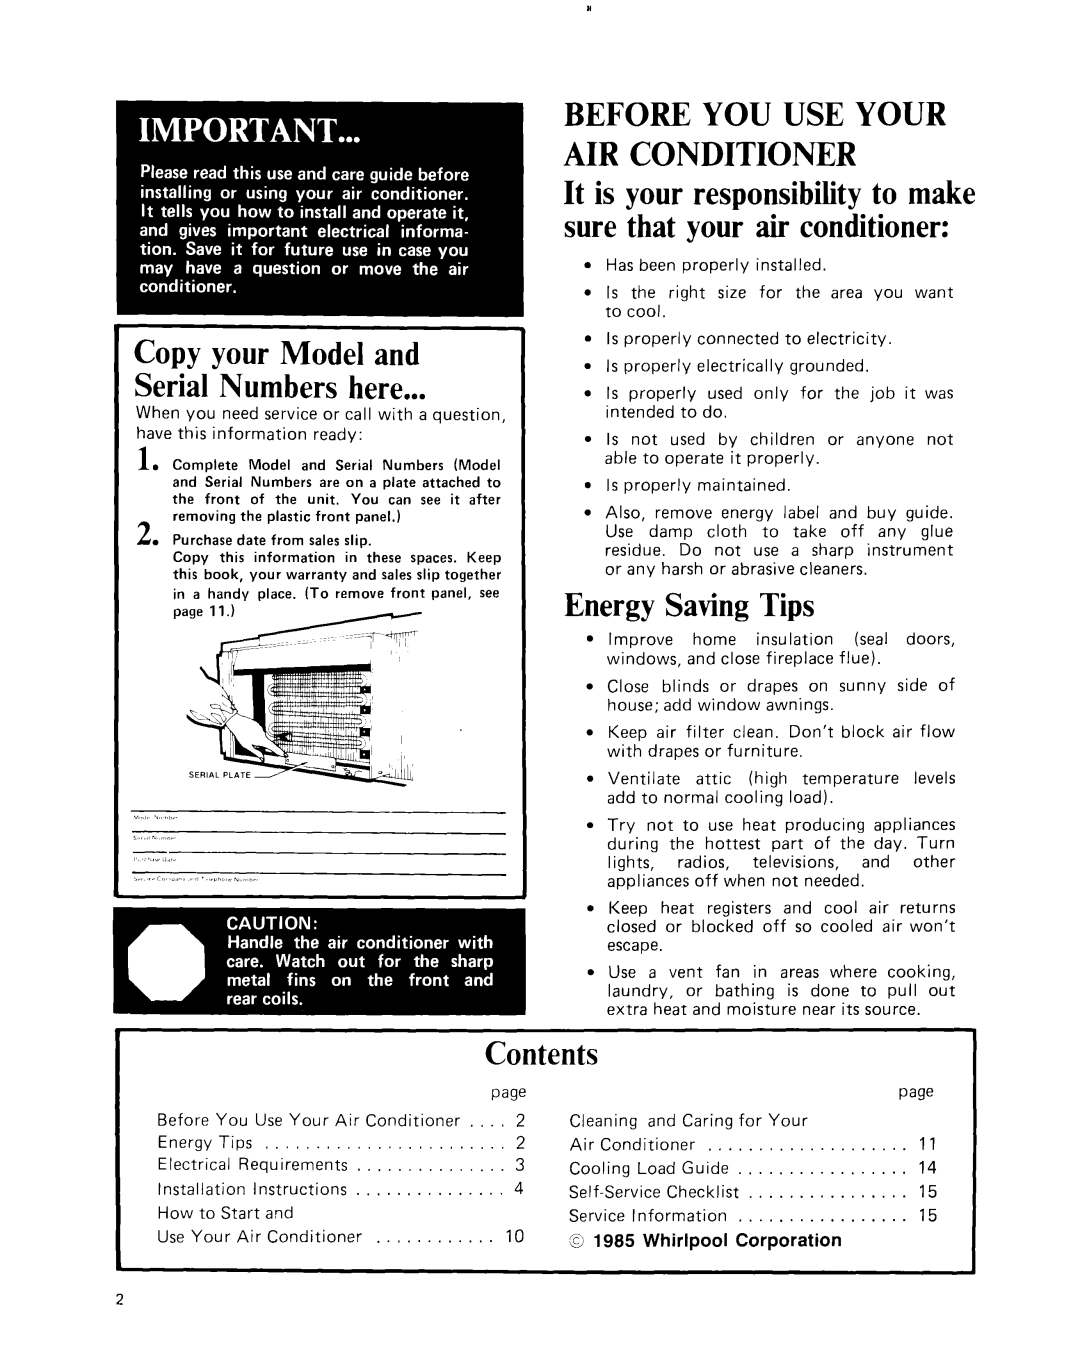 Whirlpool ACC602XP0 manual page‘a, Copy your Model and Serial Numbers here, Energy SavingTips, Contents 